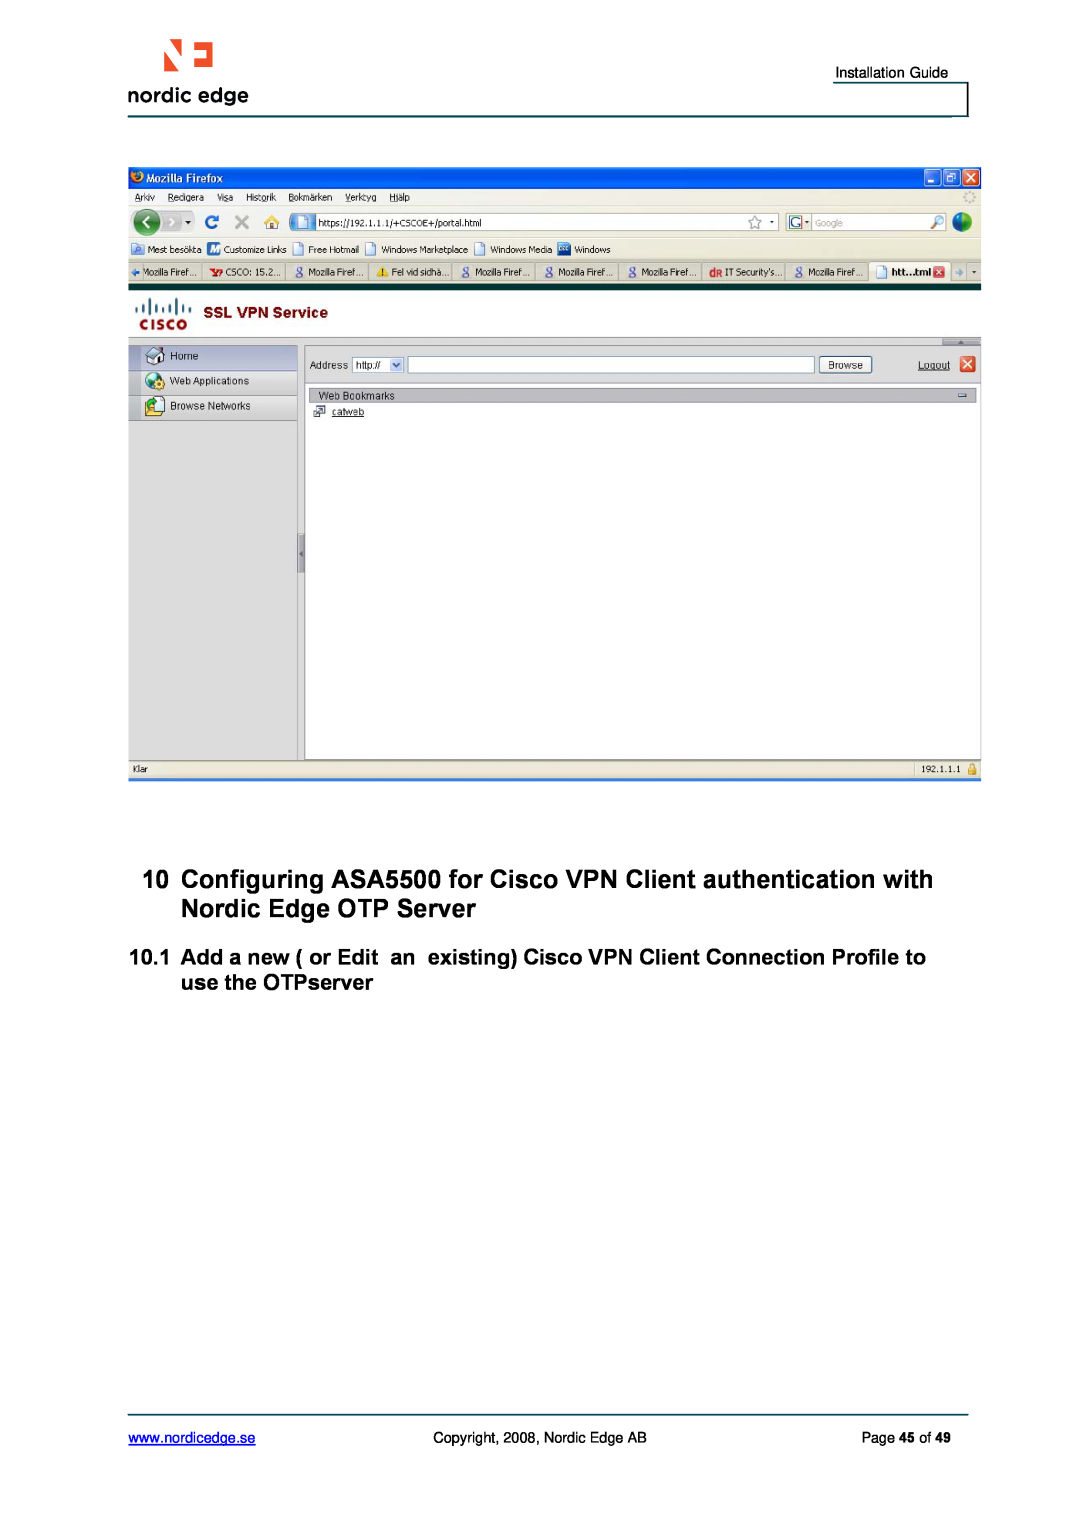 Cisco Systems ASA 5500 manual Installation Guide, Copyright, 2008, Nordic Edge AB, Page 45 of 